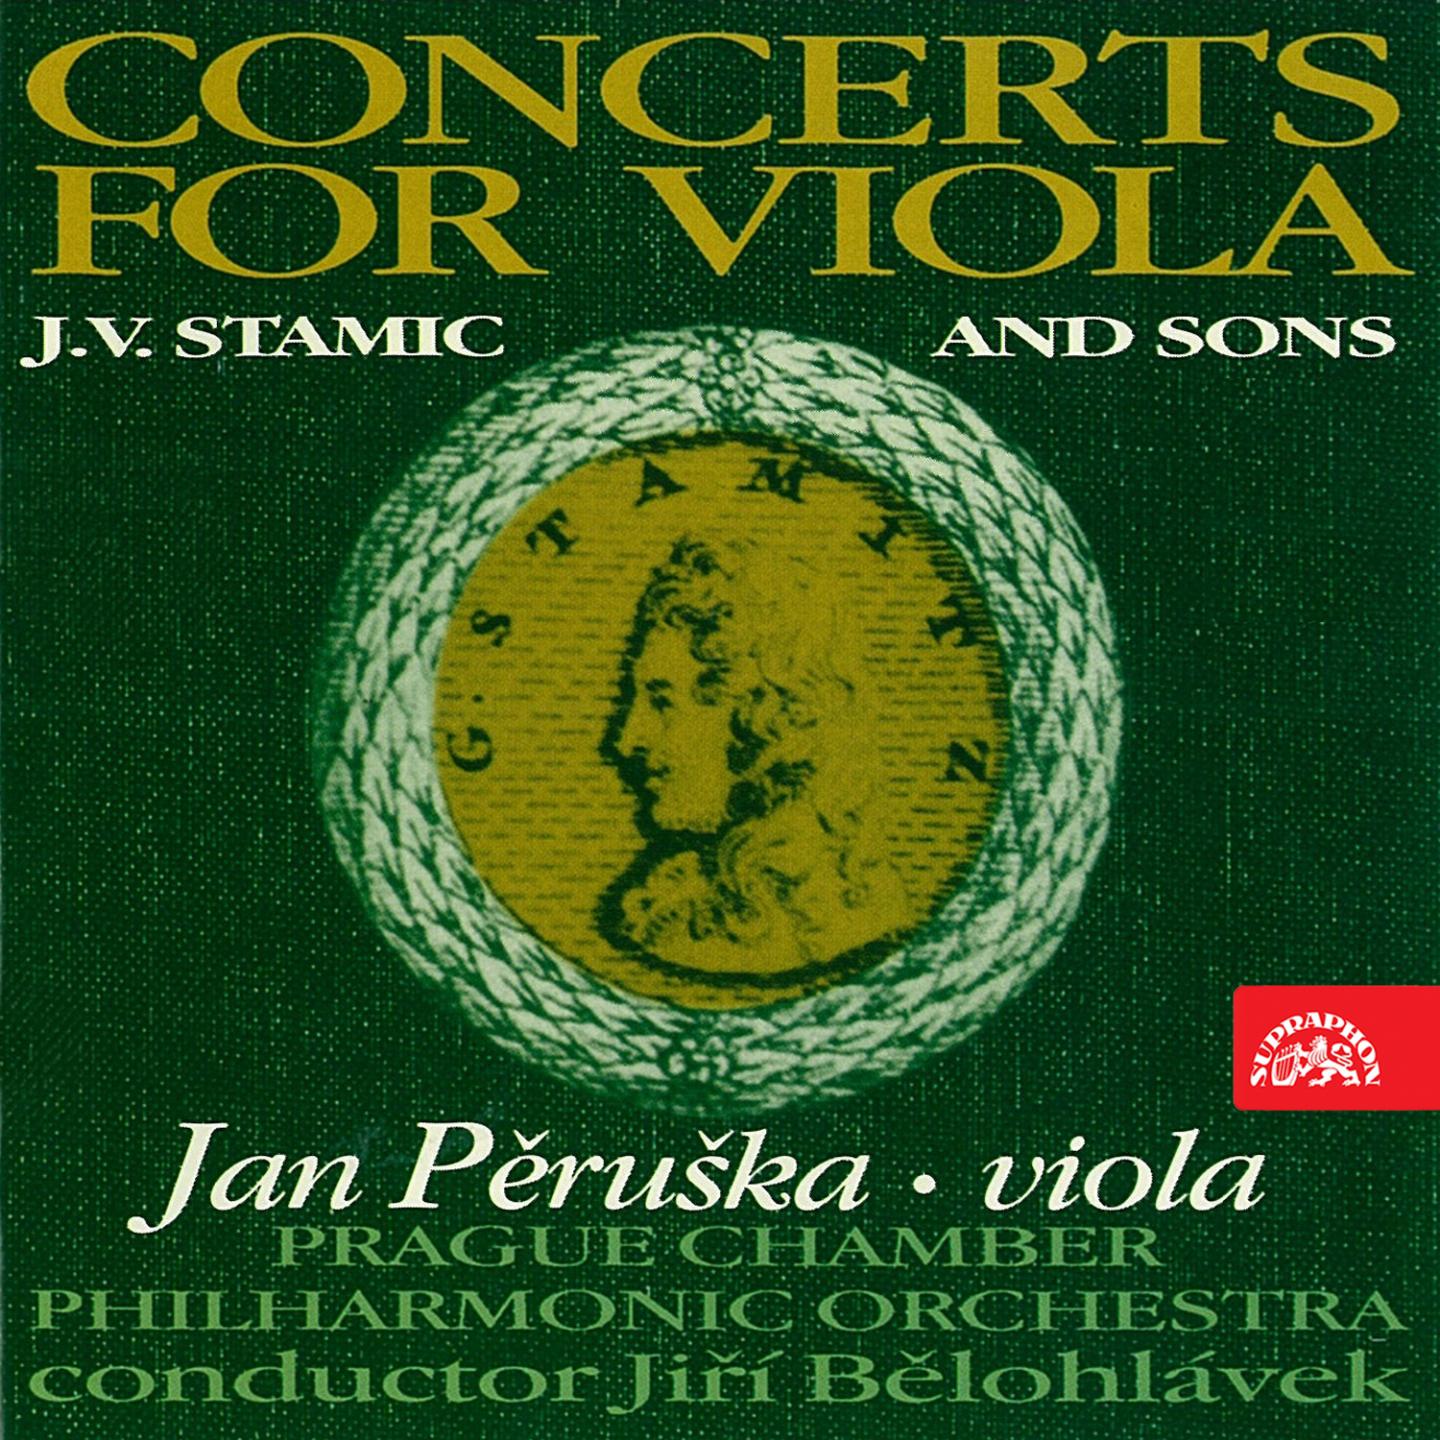 Concerto for Viola and Orchestra in B-Flat Major: II. Romance